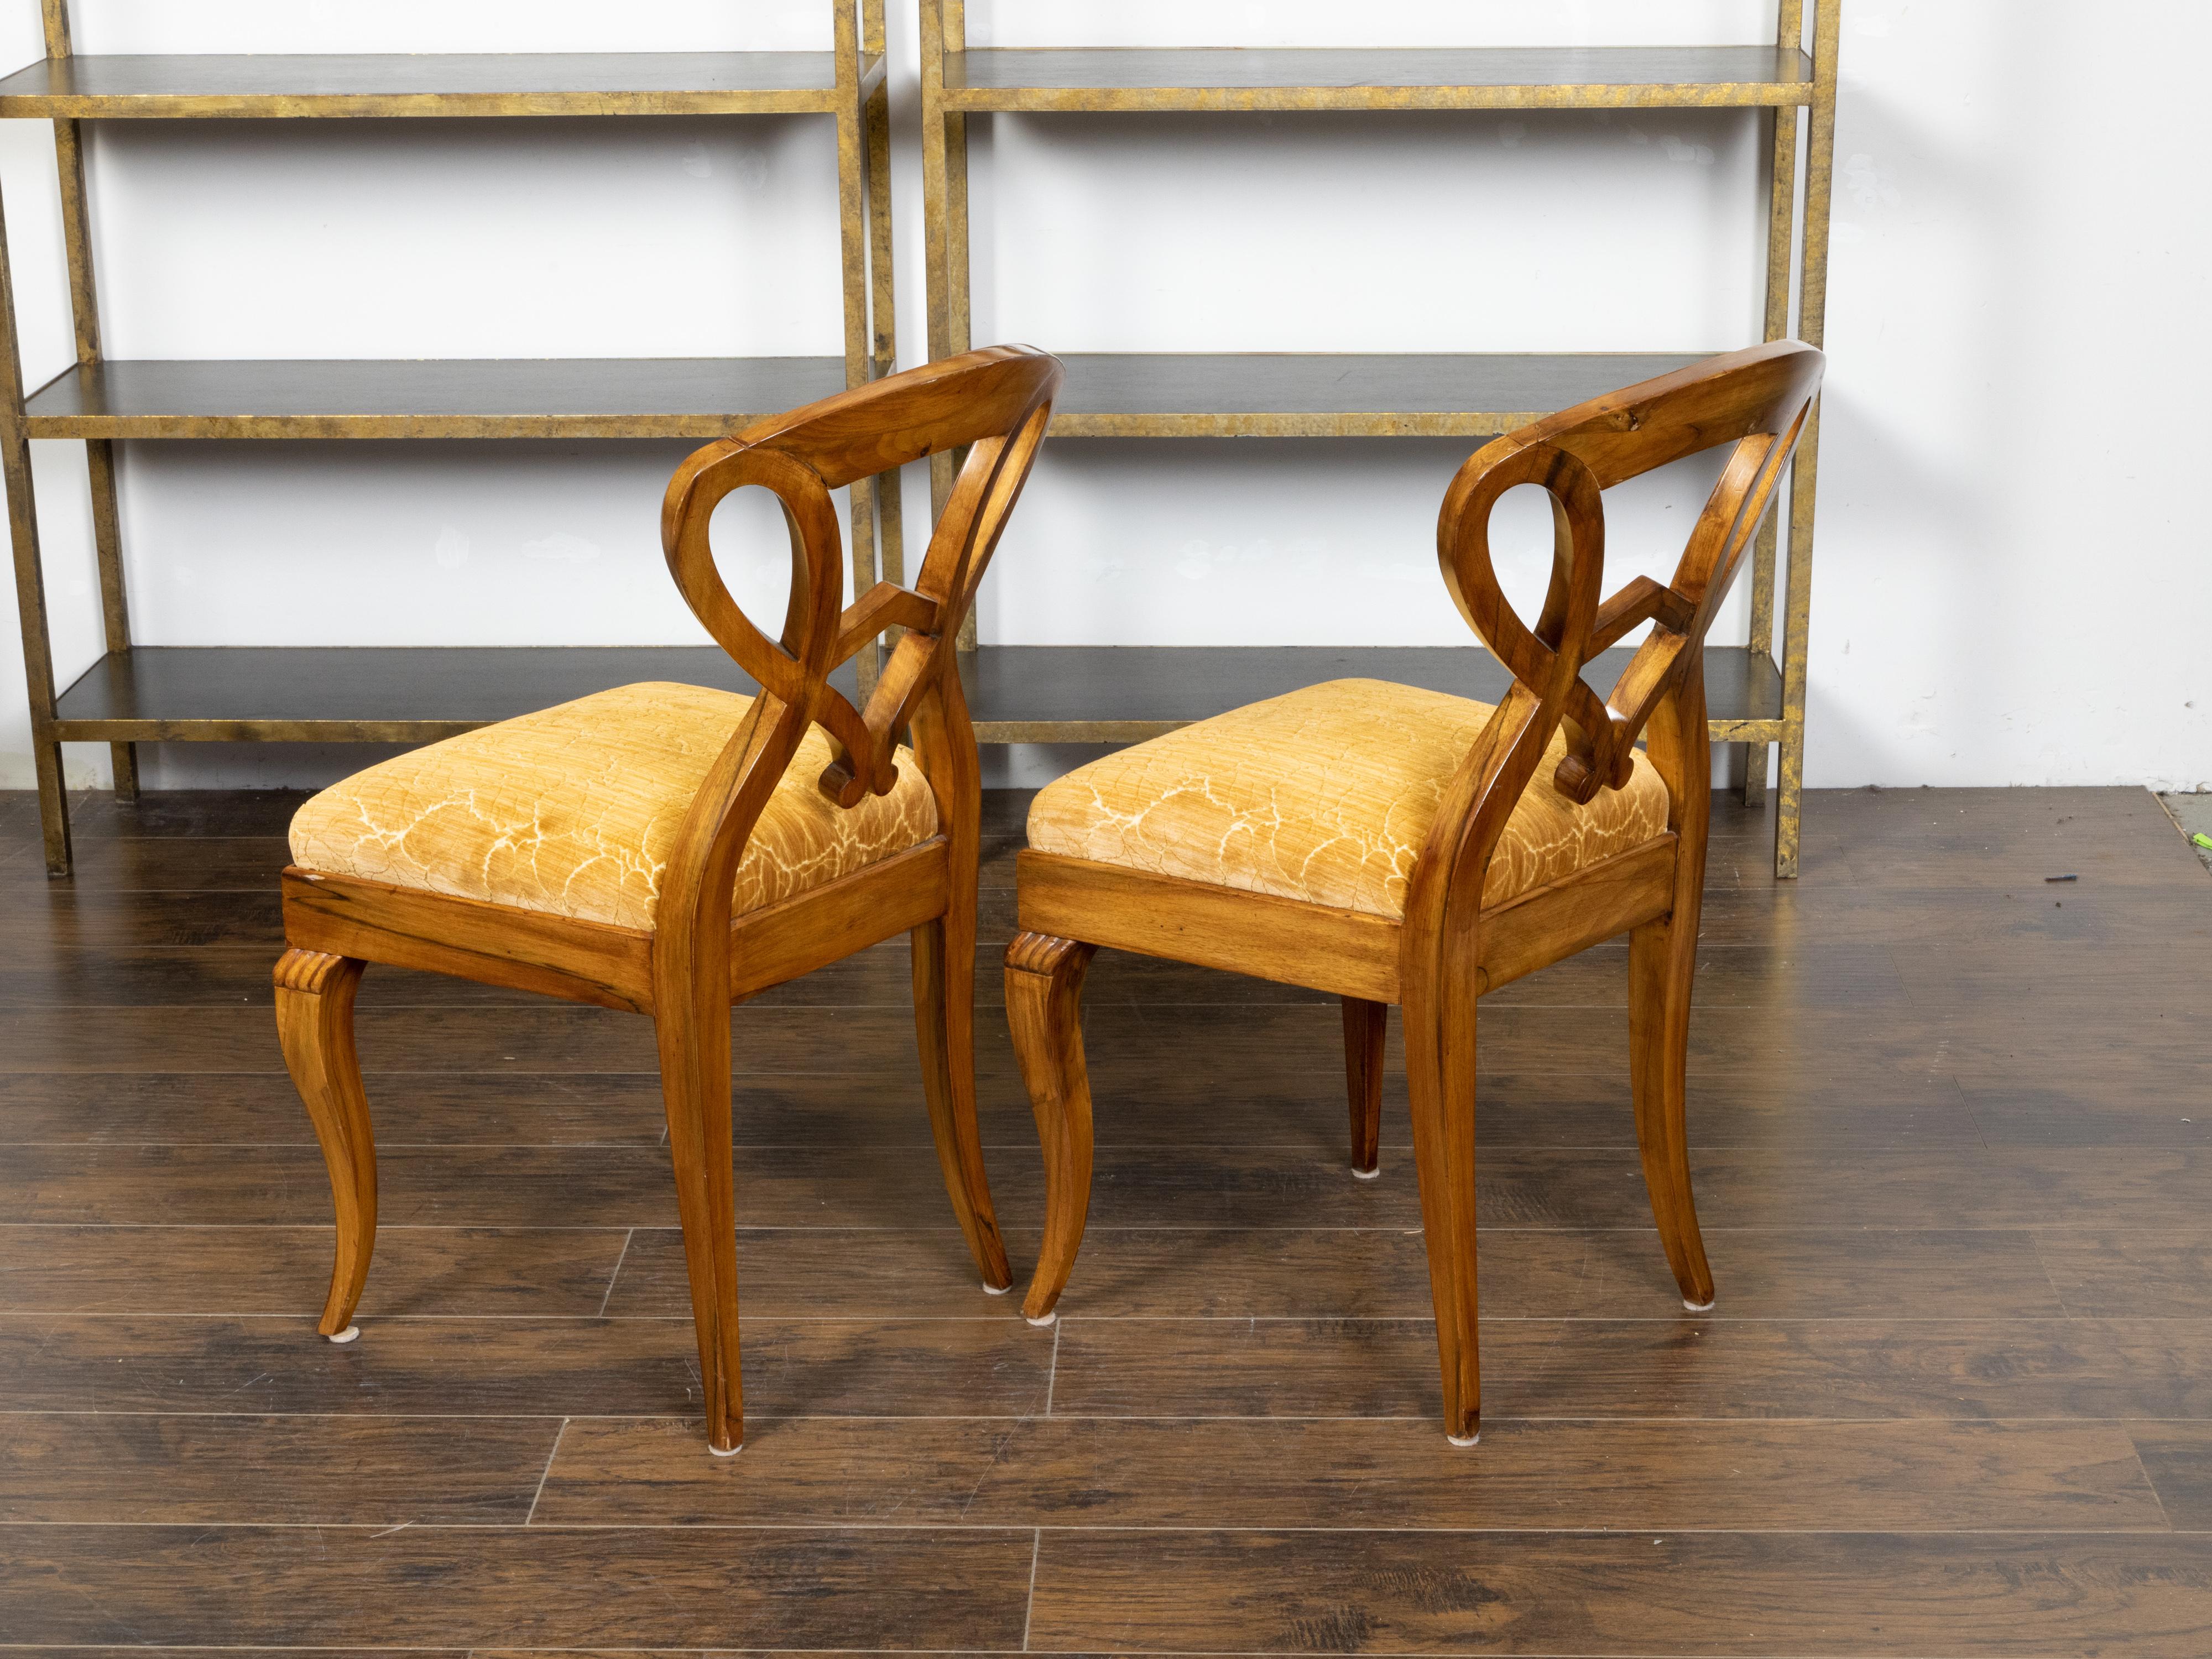 Pair of Austrian Biedermeier 19th Century Side Chairs with Carved Open Backs For Sale 1